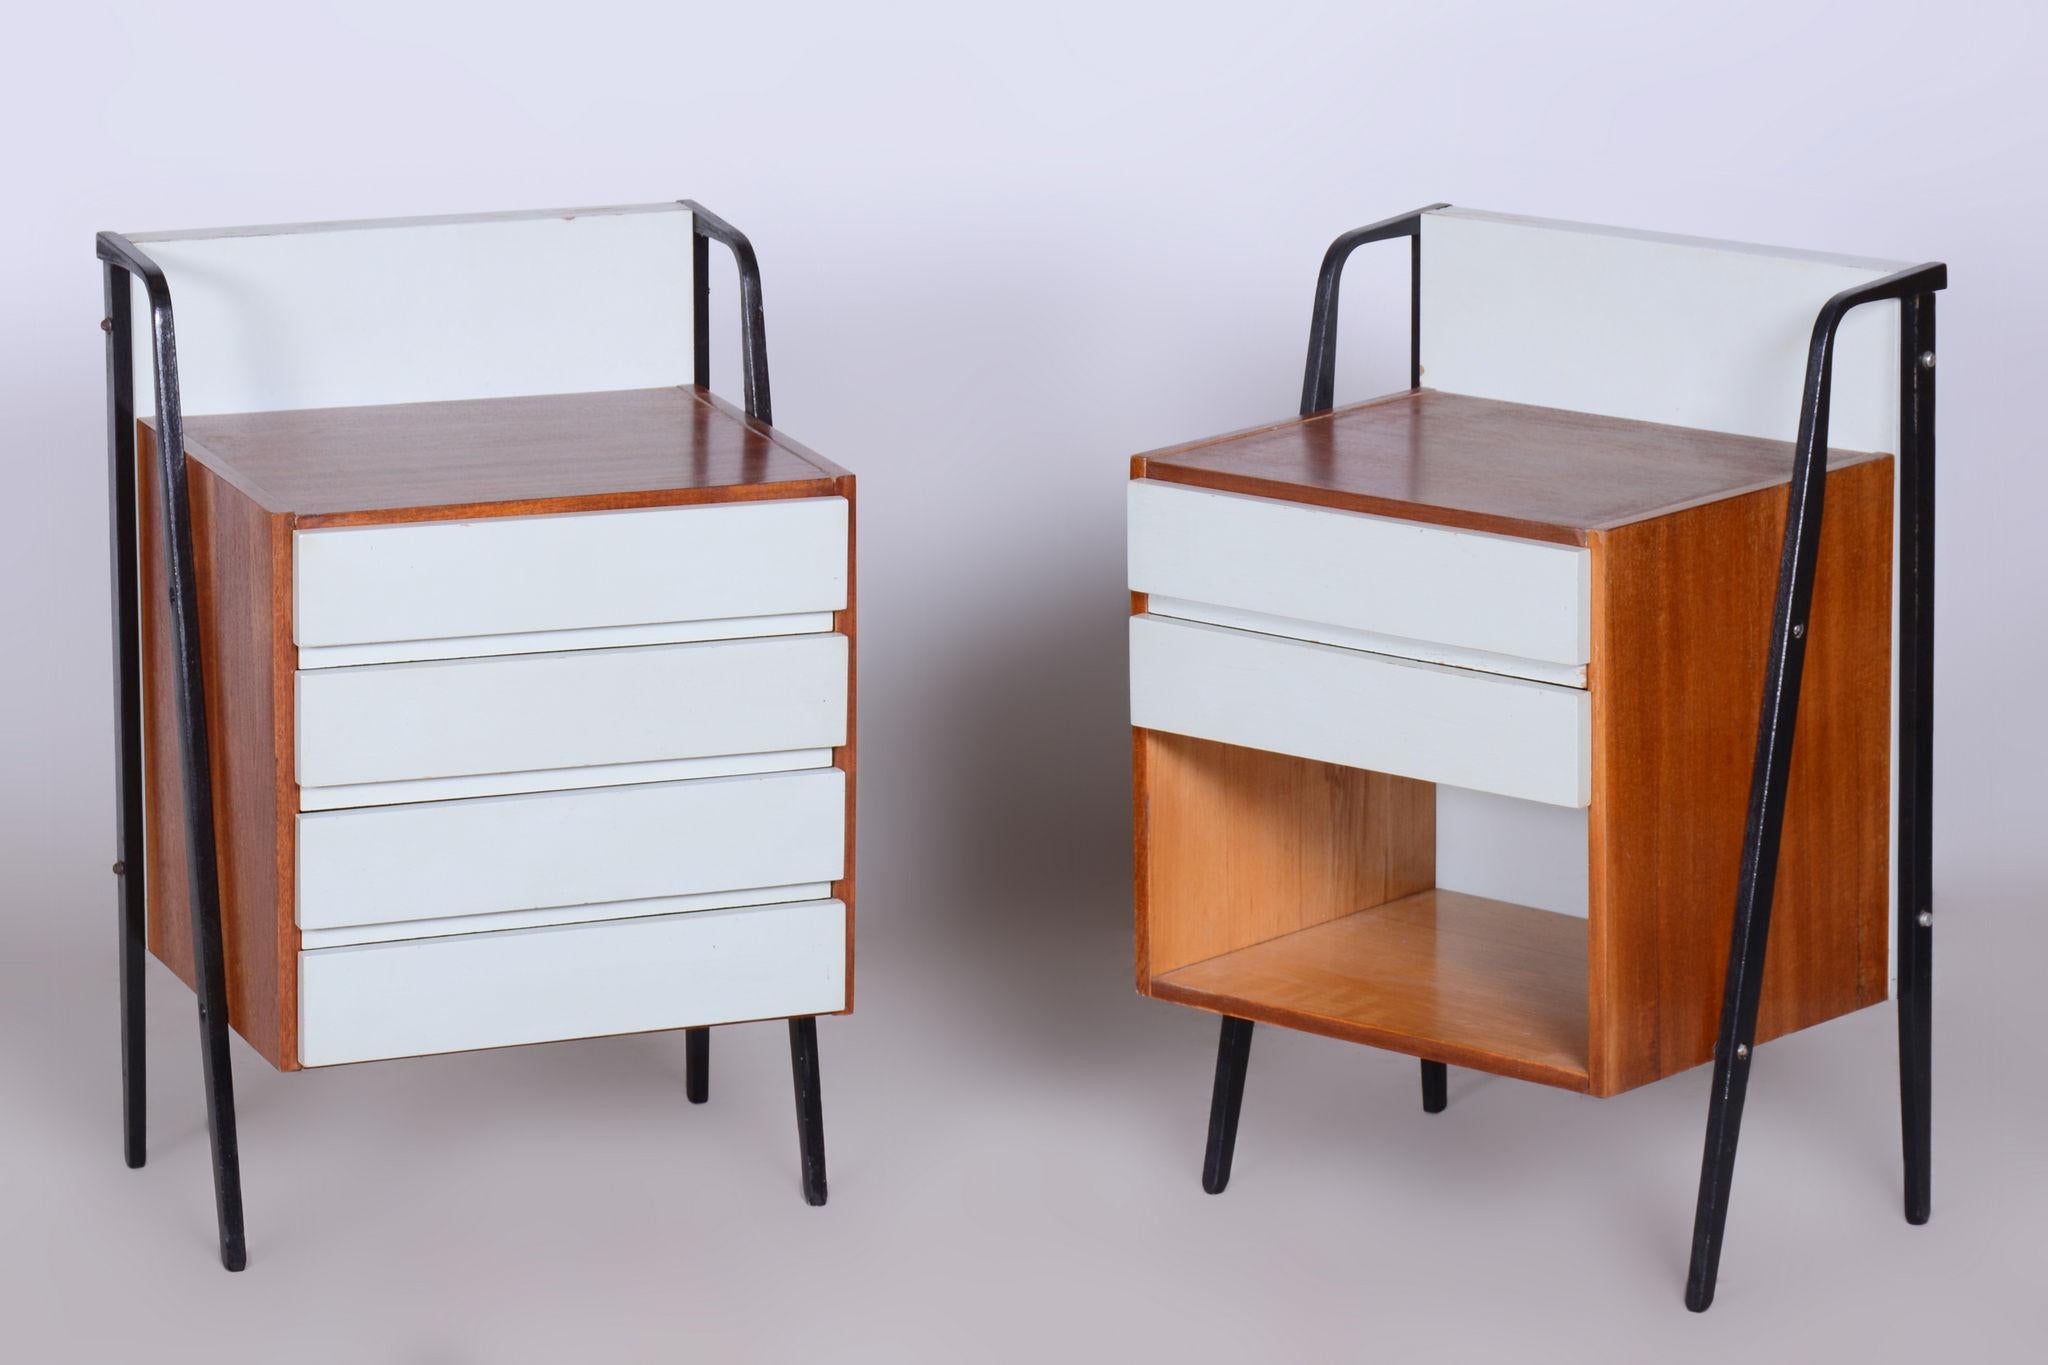 Wood Restored MidCentury Cabinet Set, Mahogany, Revived Polish, Central Europe, 1950s For Sale